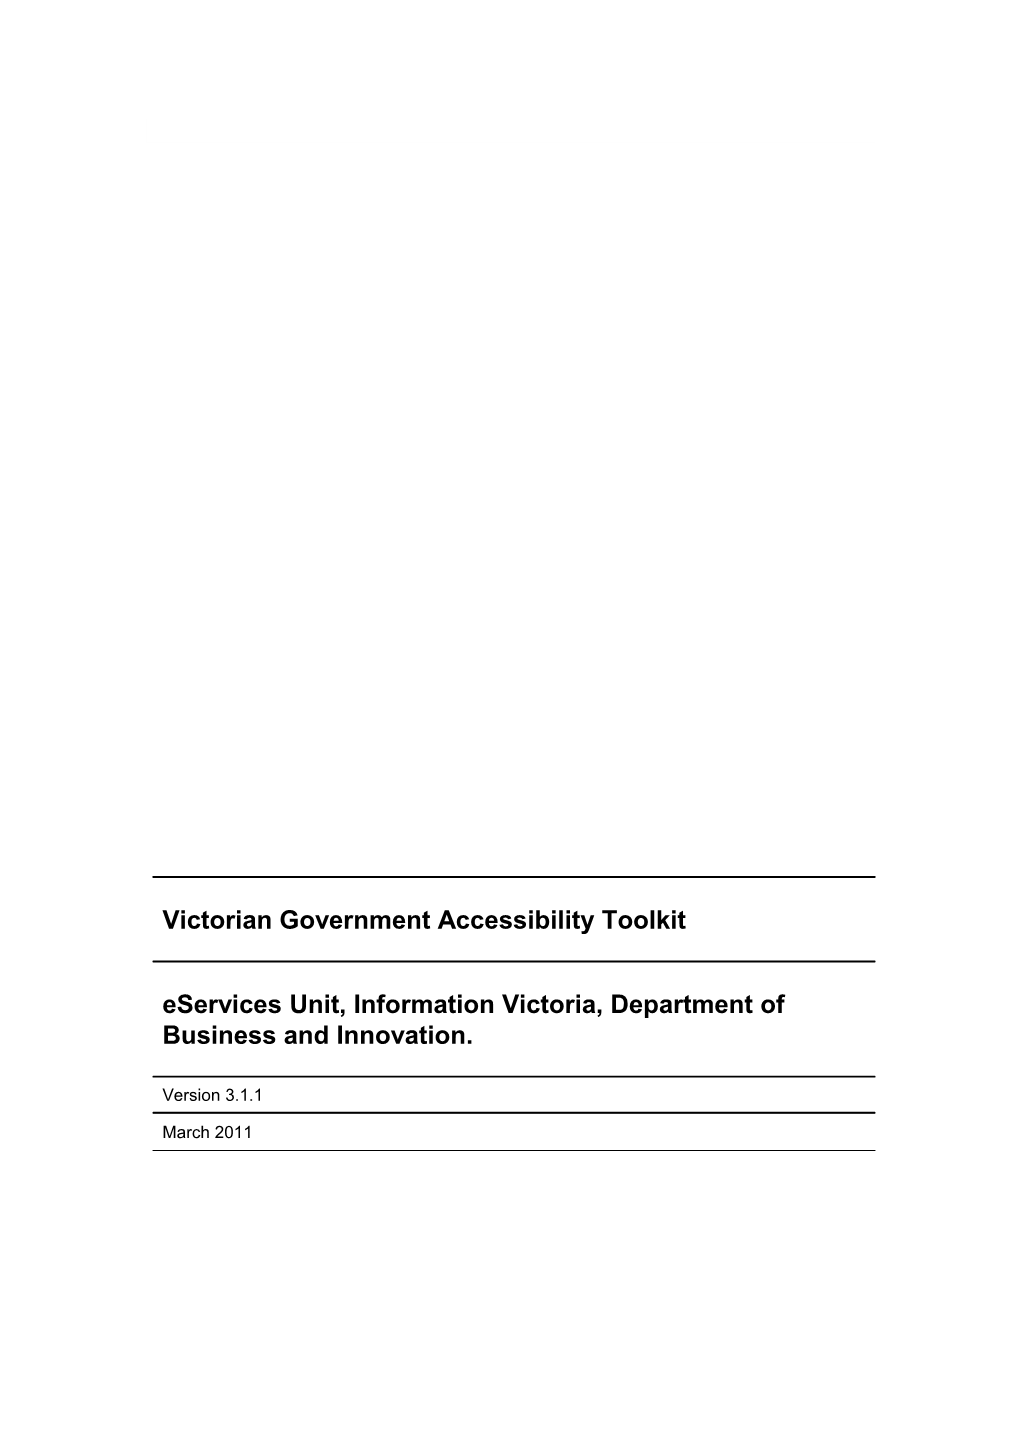 Victorian Government Accessibility Toolkit - Version 3 - September 2009